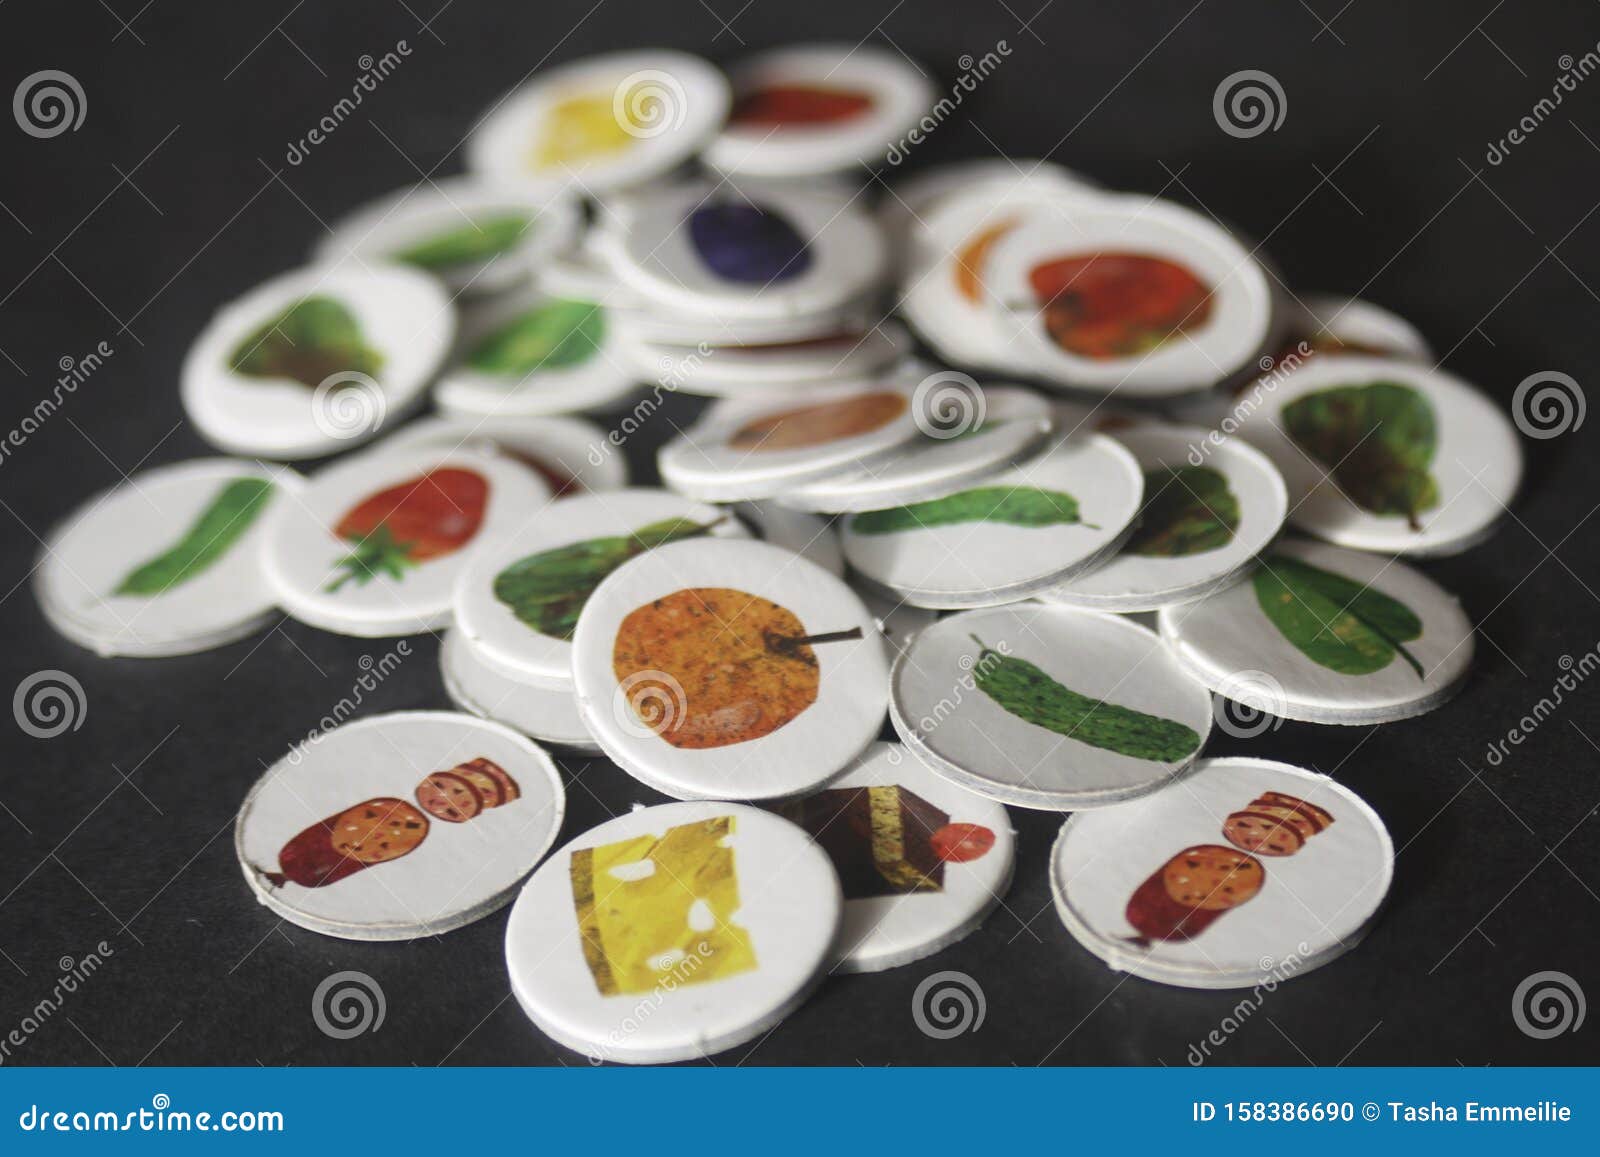 the very hungry caterpillar food disks piled up